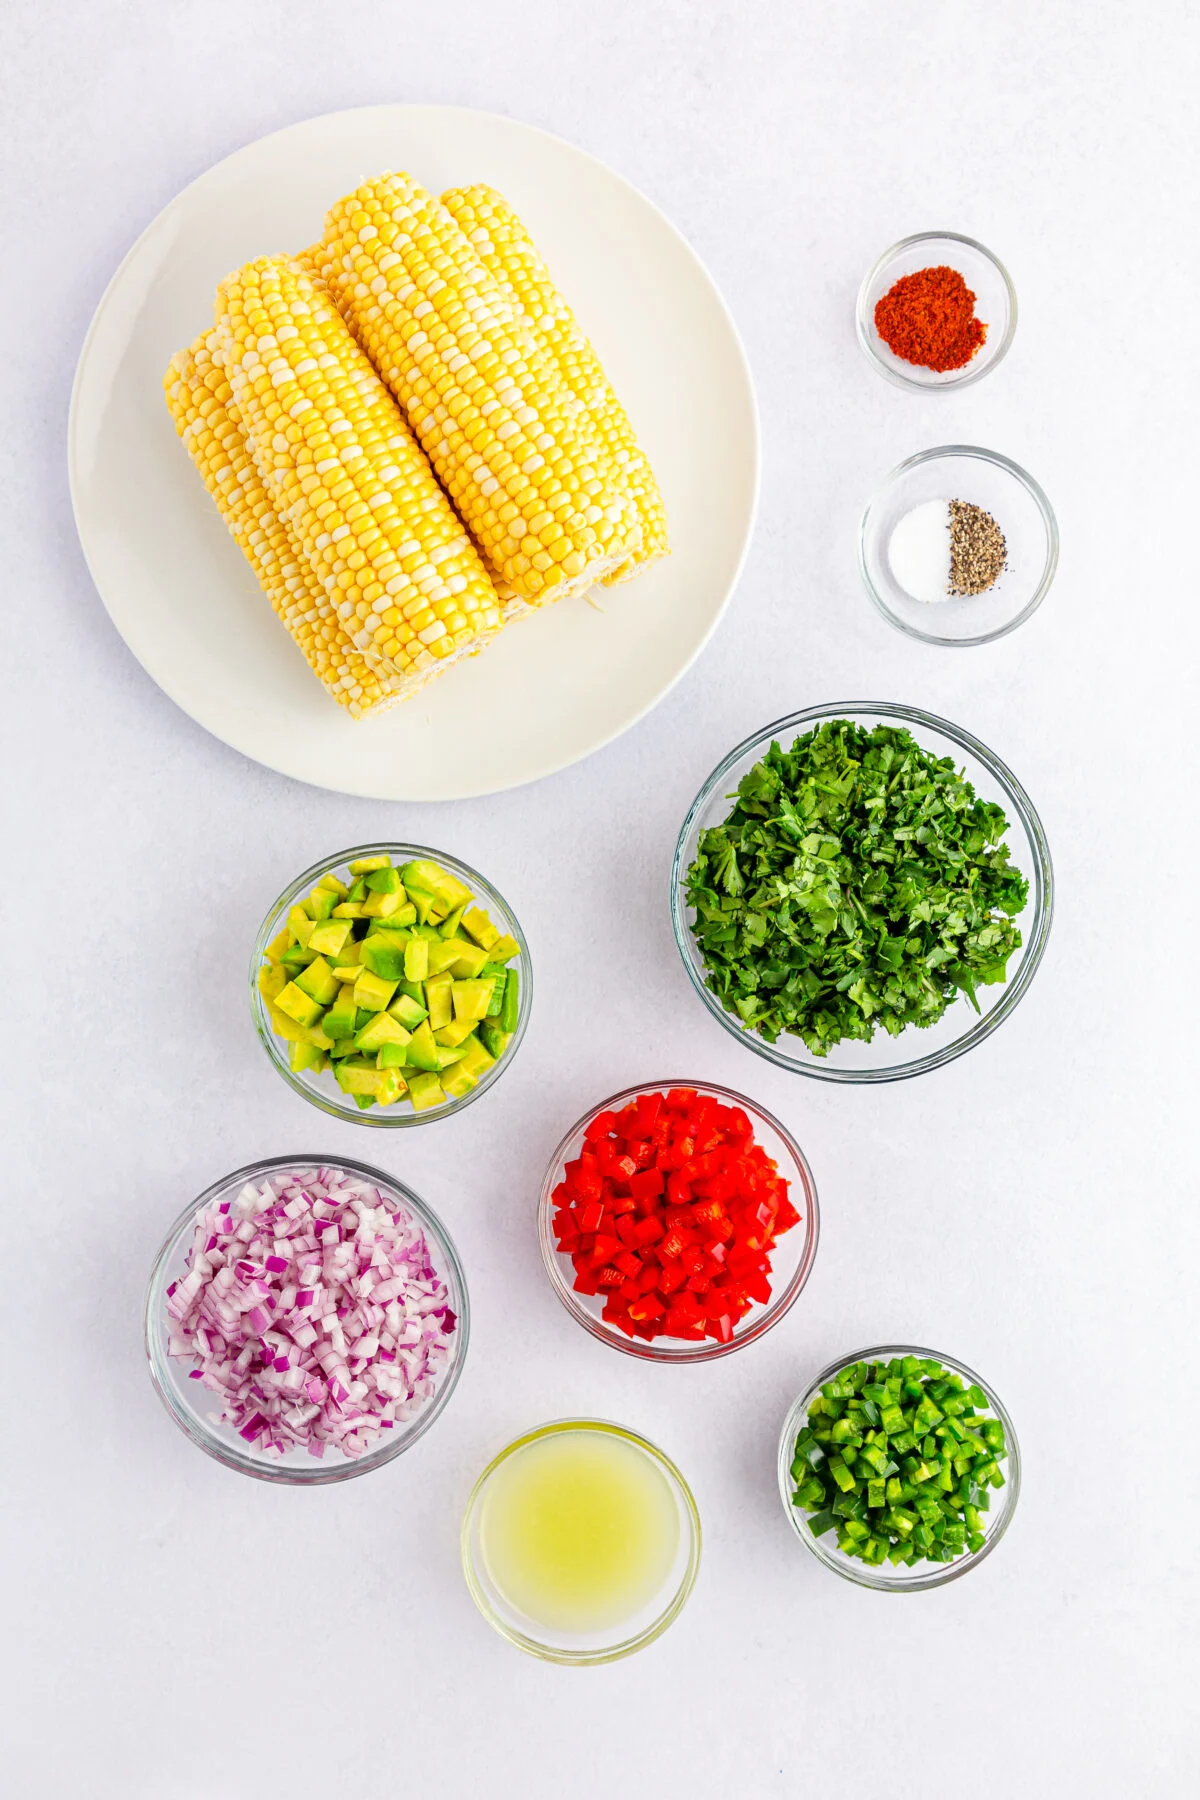 Ingredients for homemade corn salsa.